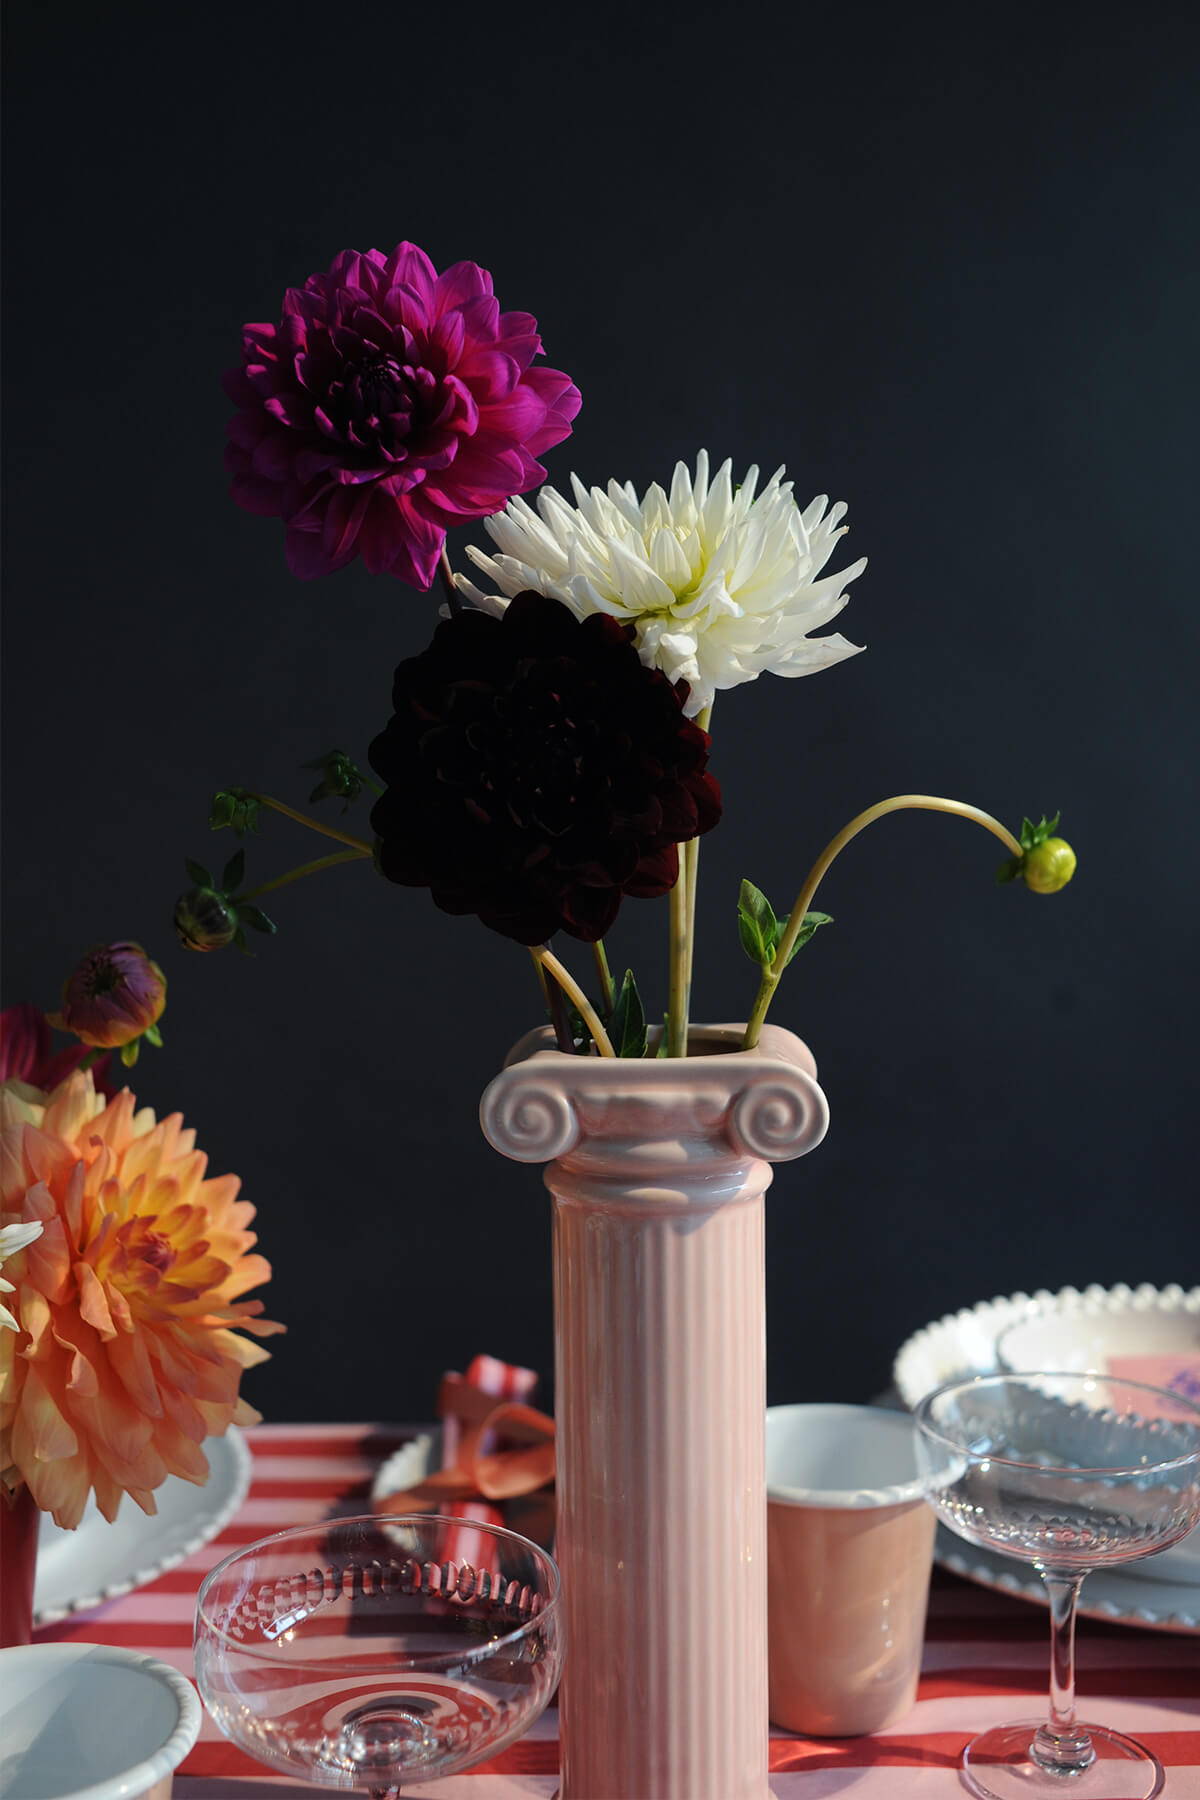 A close up of the Doiy Athena Vase in Pink, with 3 dahlia stems inside.